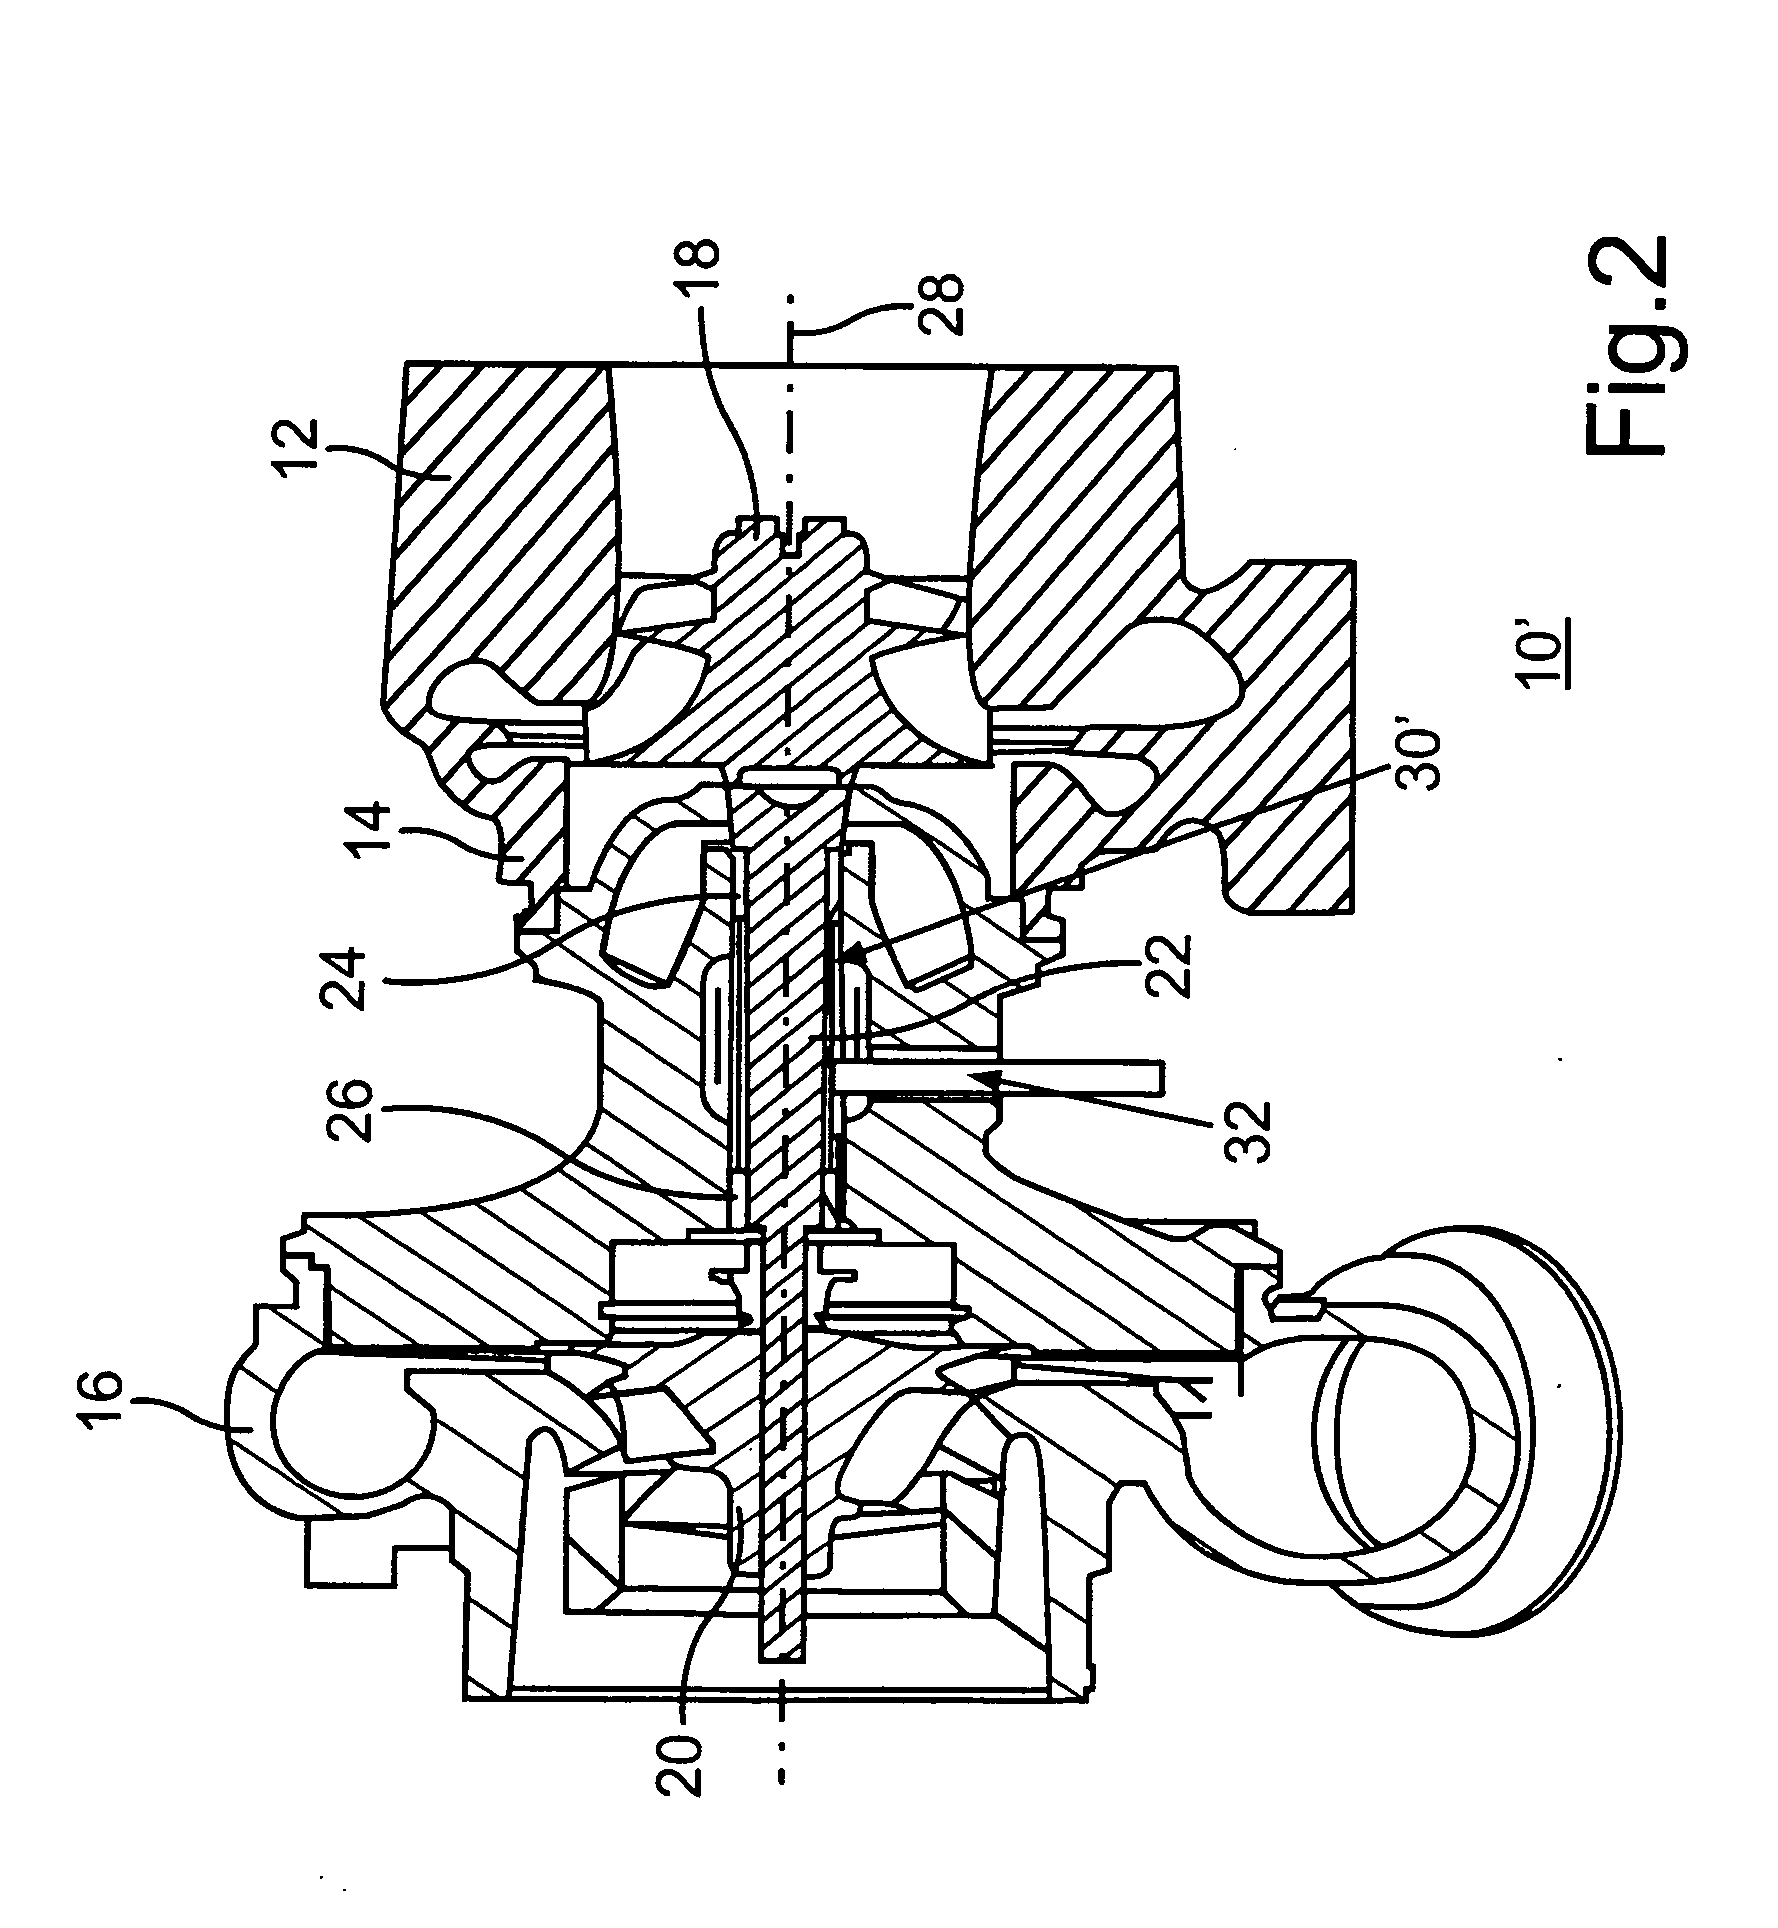 Sleeve element for axially fixing a bearing and exhaust gas turbocharger